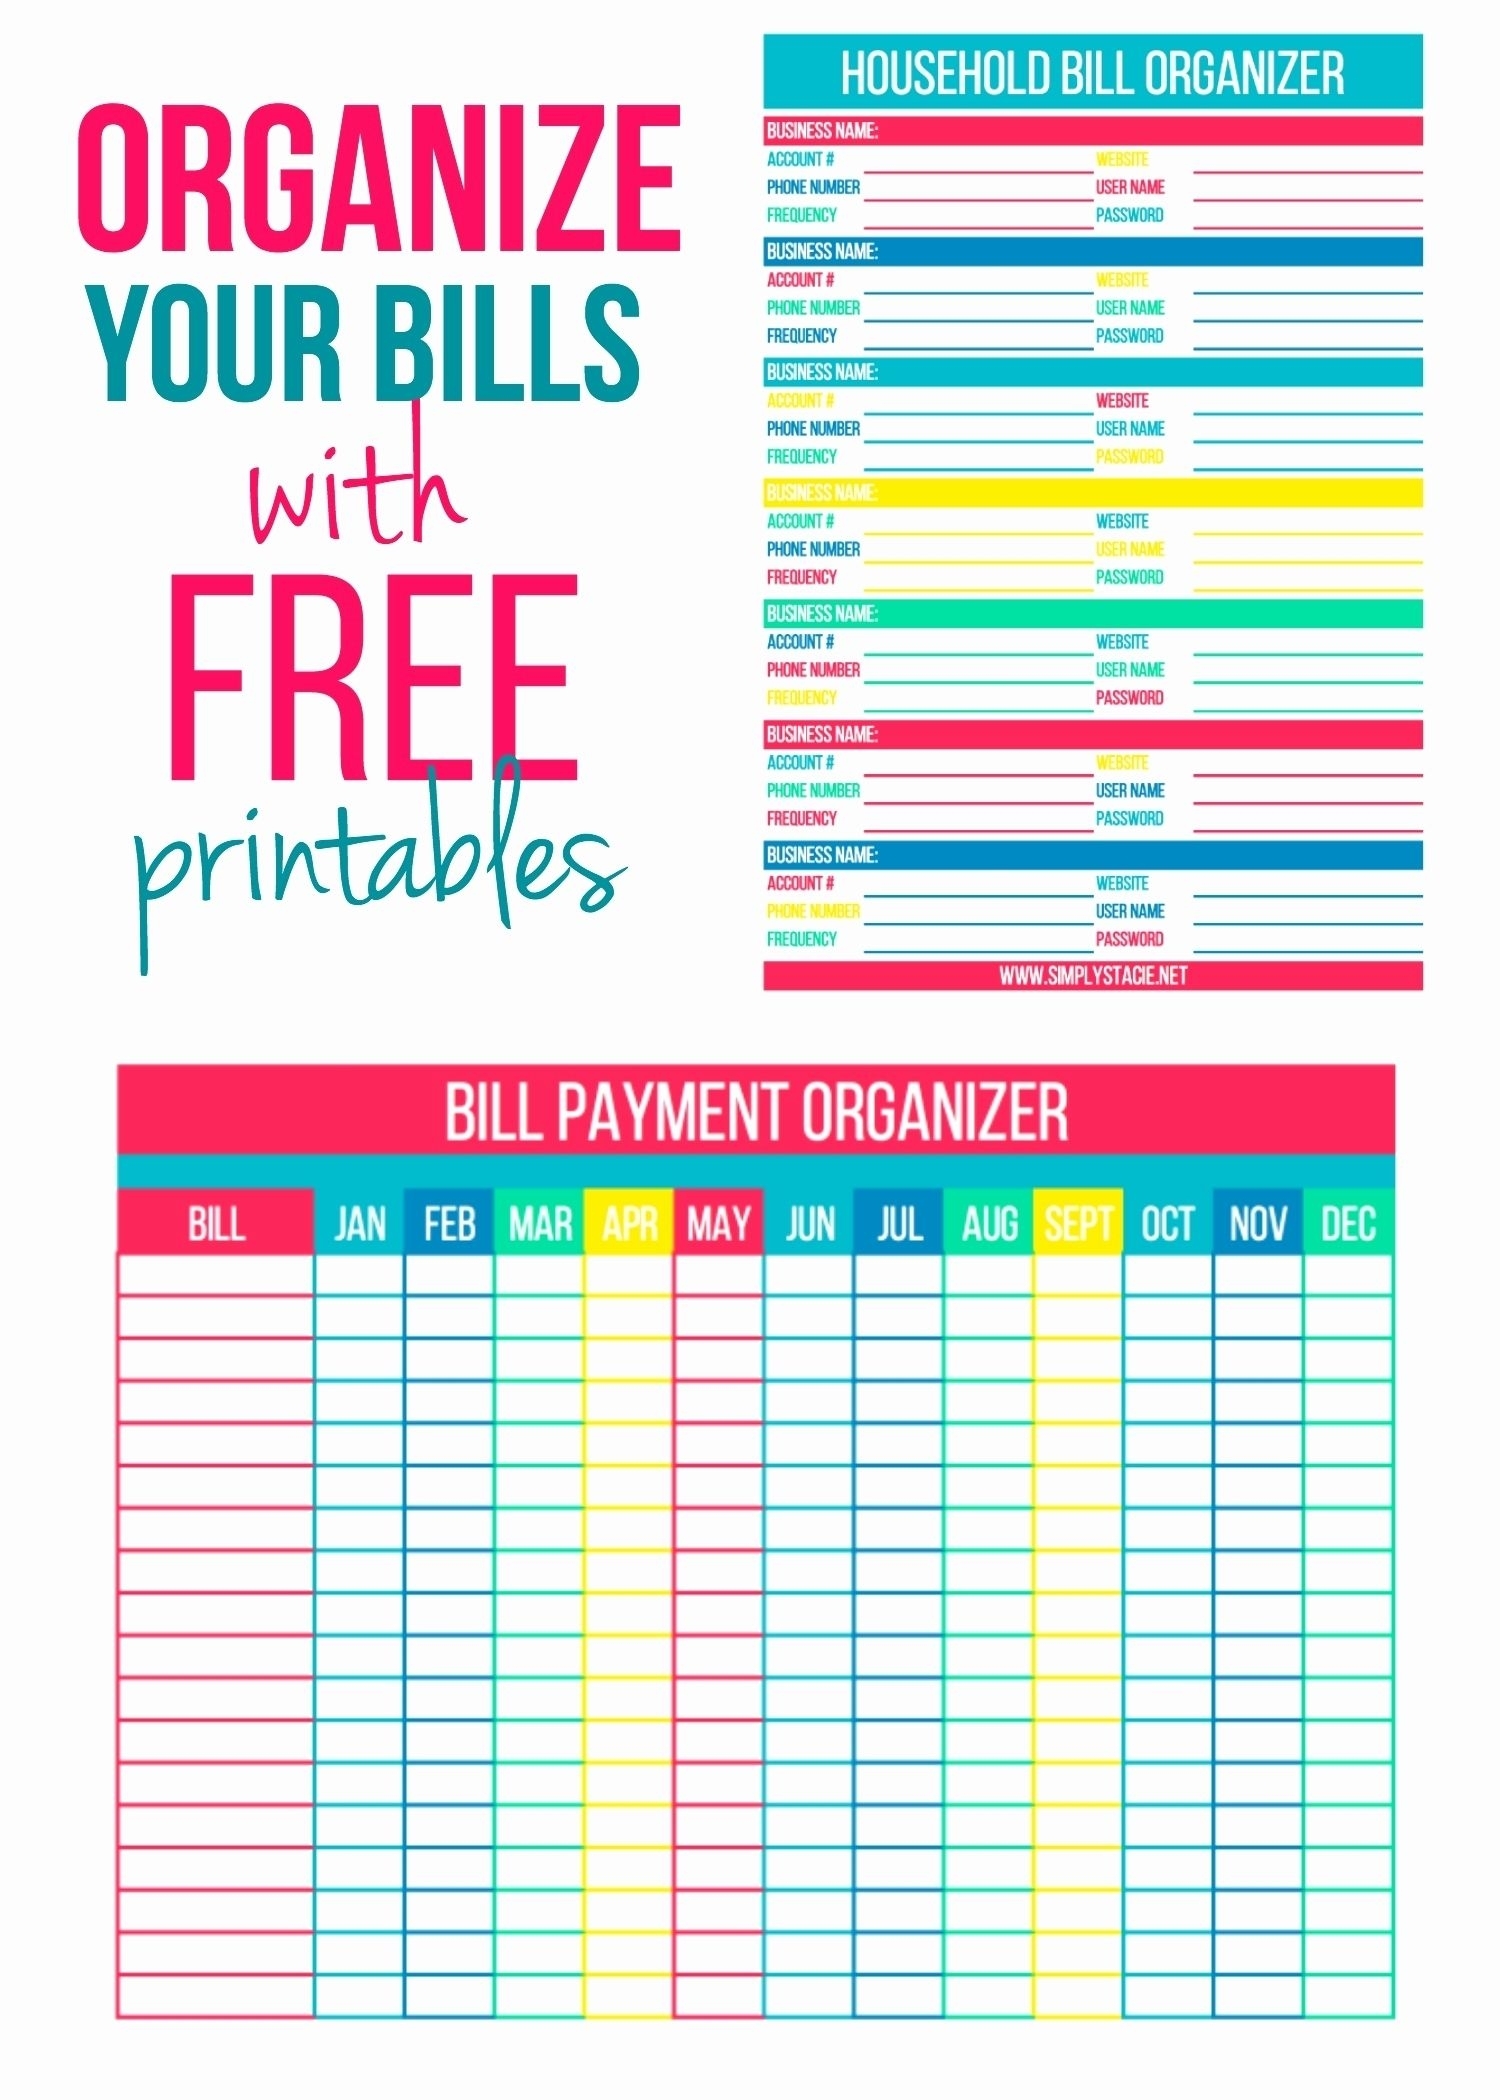 Printable Bill Organizer Spreadsheet Awesome Monthly Bills Organizer intended for Free Print Out Bill Organizer